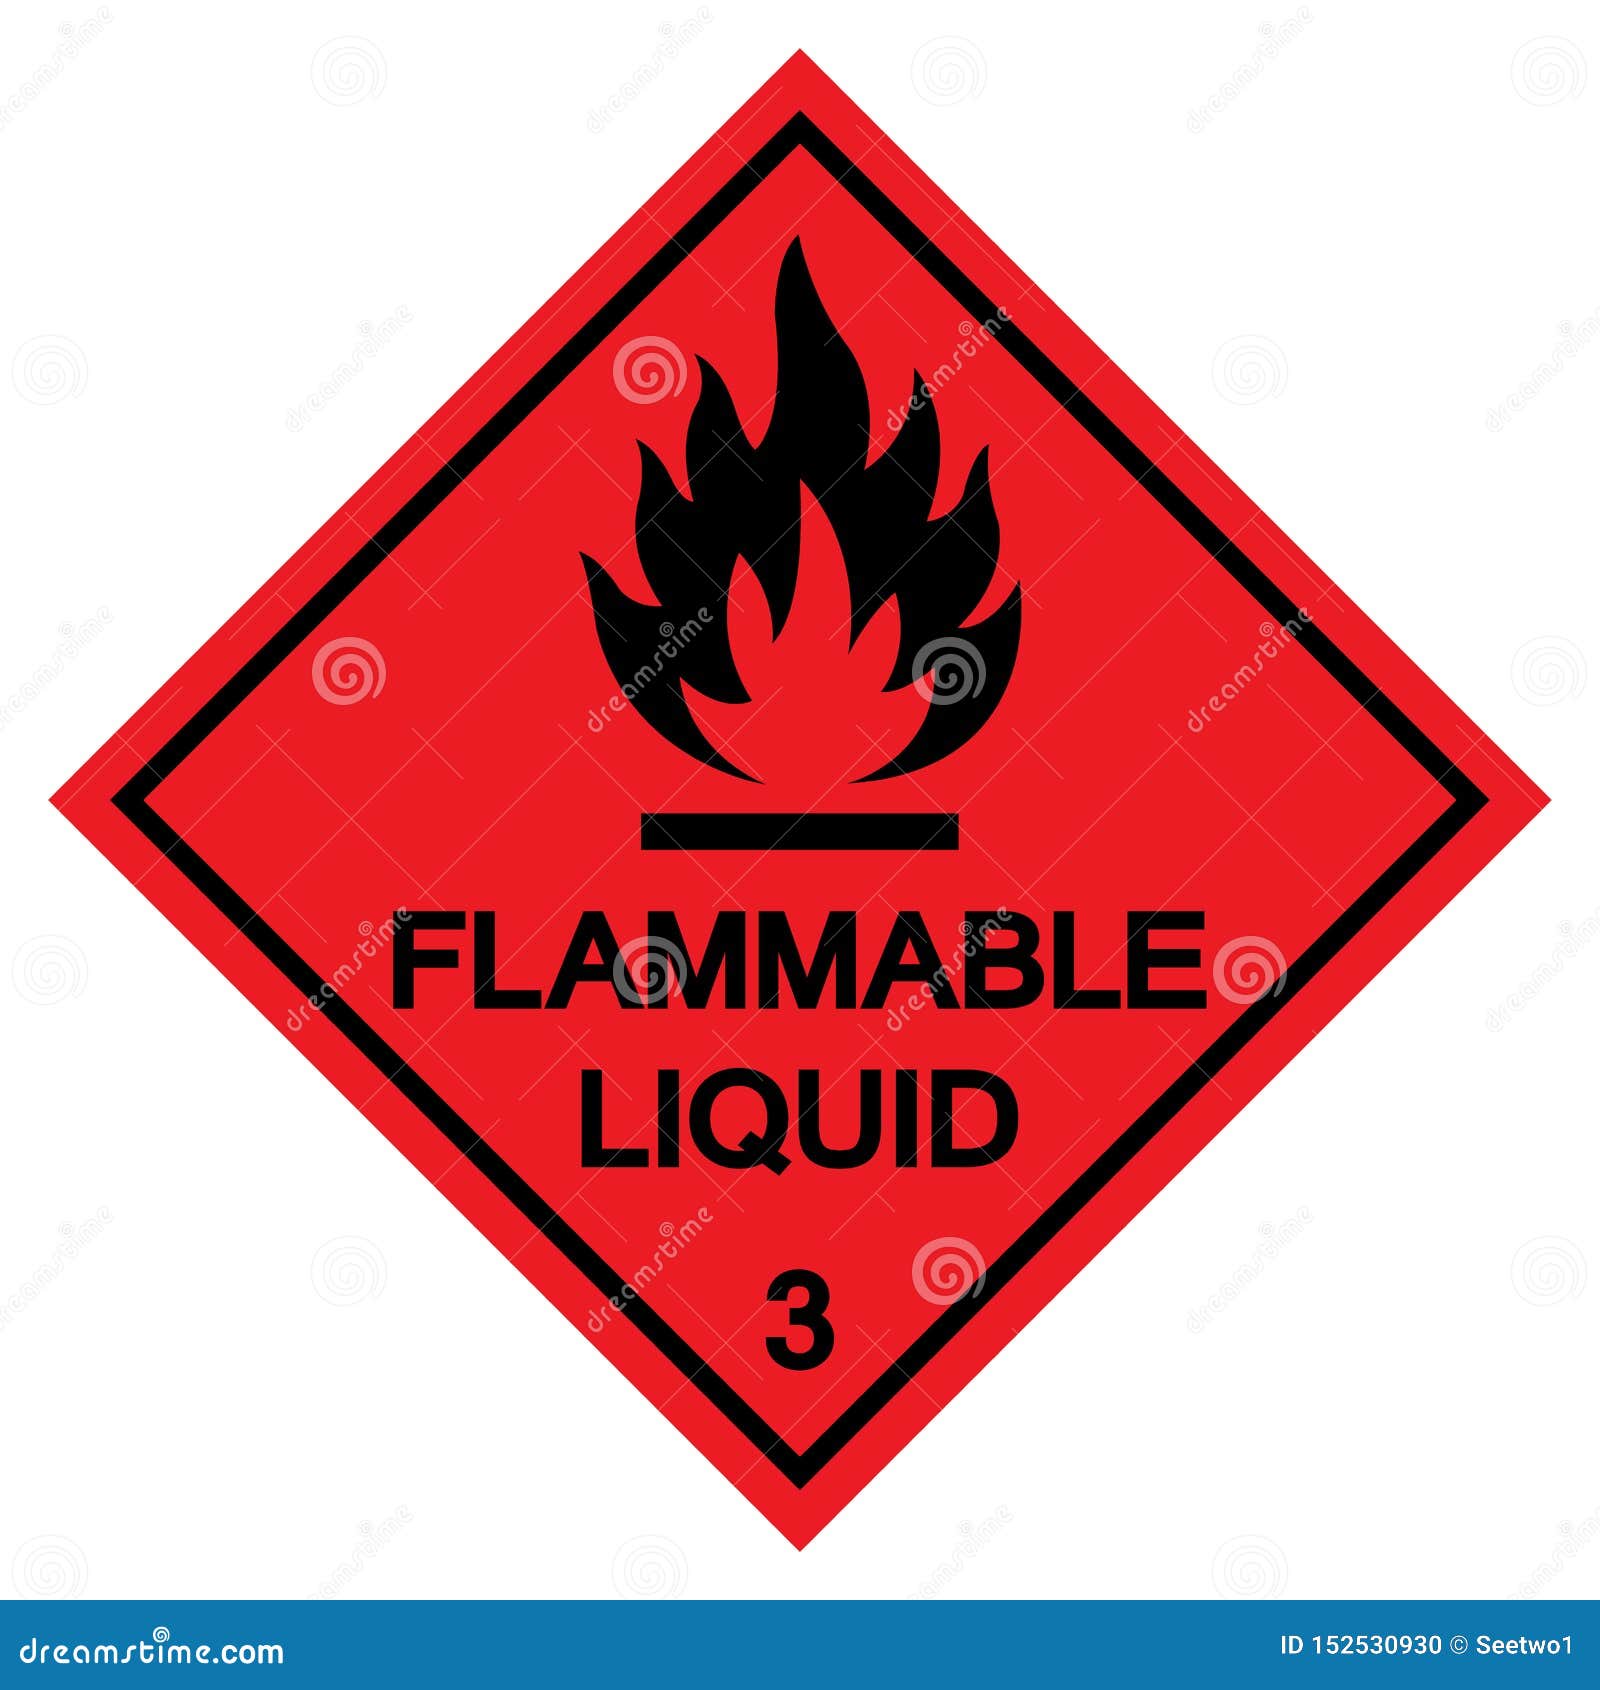 flammable liquid  sign isolate on white background,  eps.10